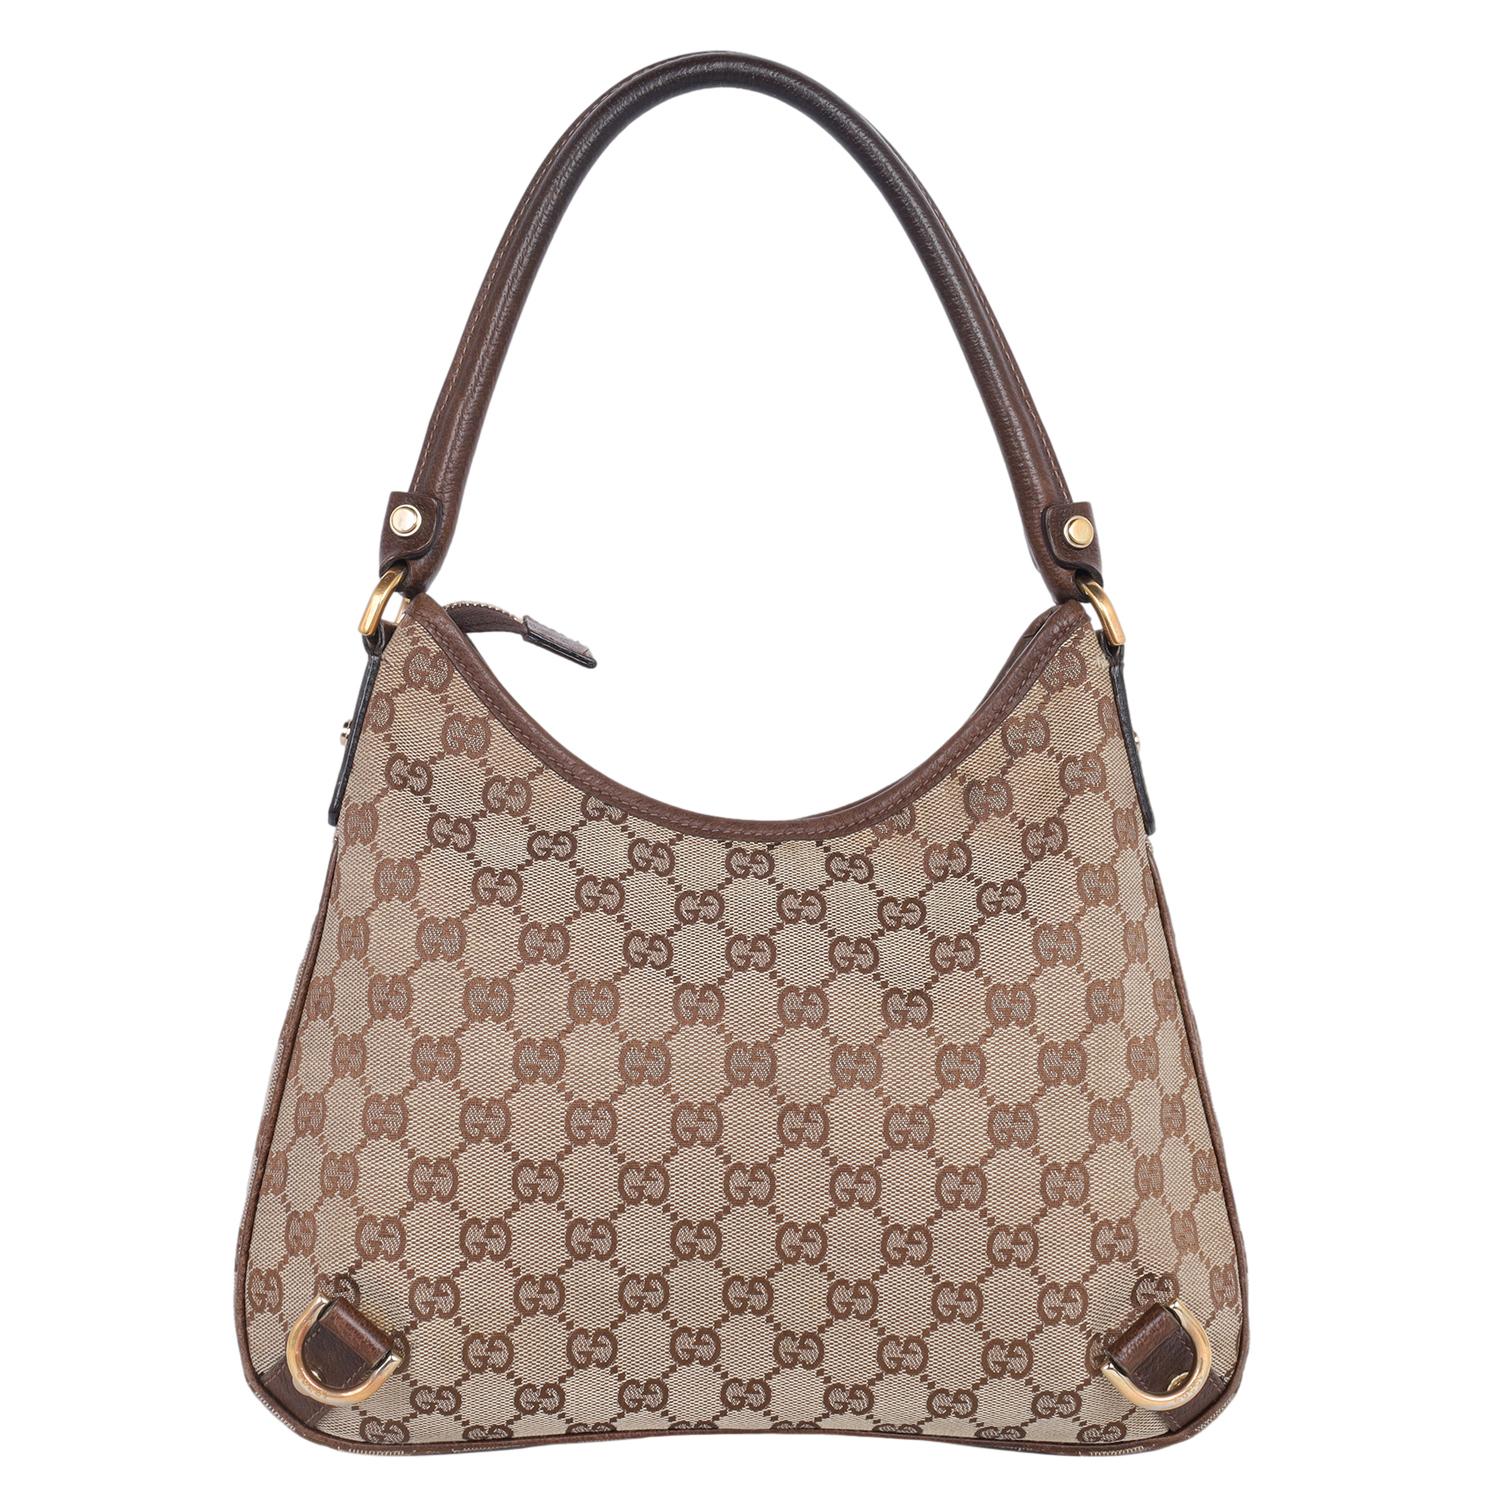 Authentic, pre-loved Gucci GG brown monogram Abbey shoulder bag. Features: brown canvas with leather trim, gold hardware, zipper top closure, brown textile interior lining with zipper slip pocket and patch pocket, round leather shoulder